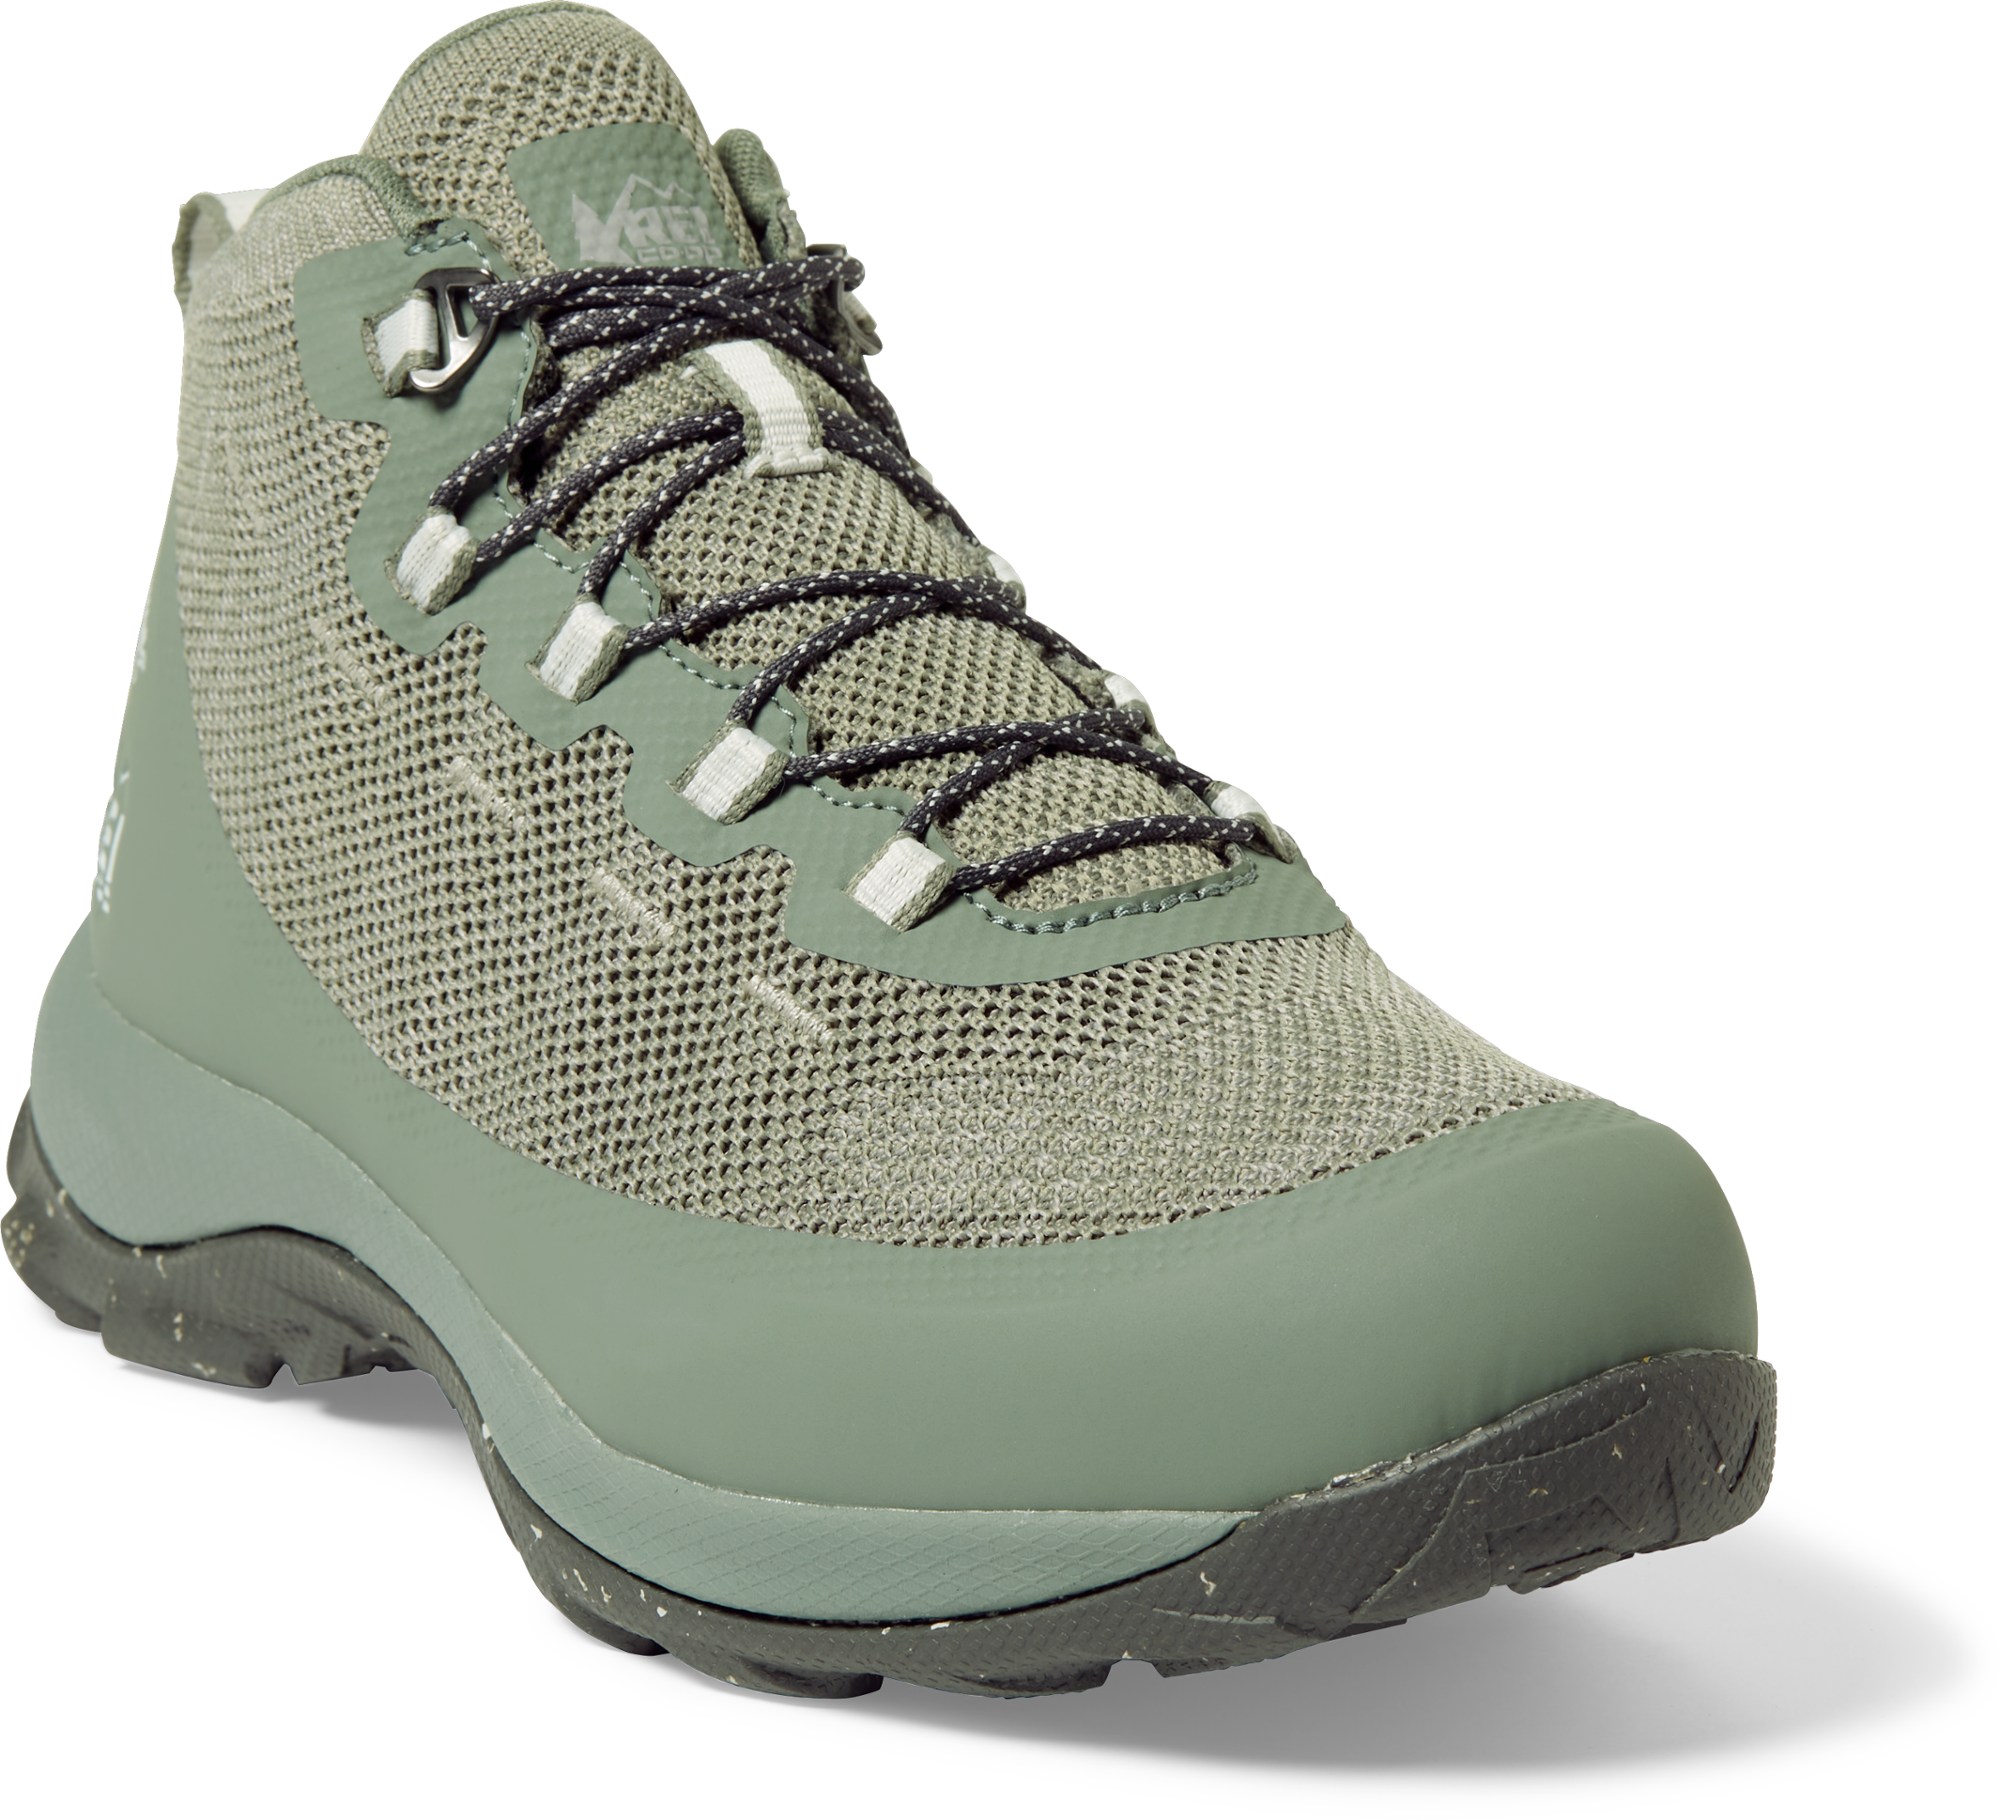 REI hiking boots